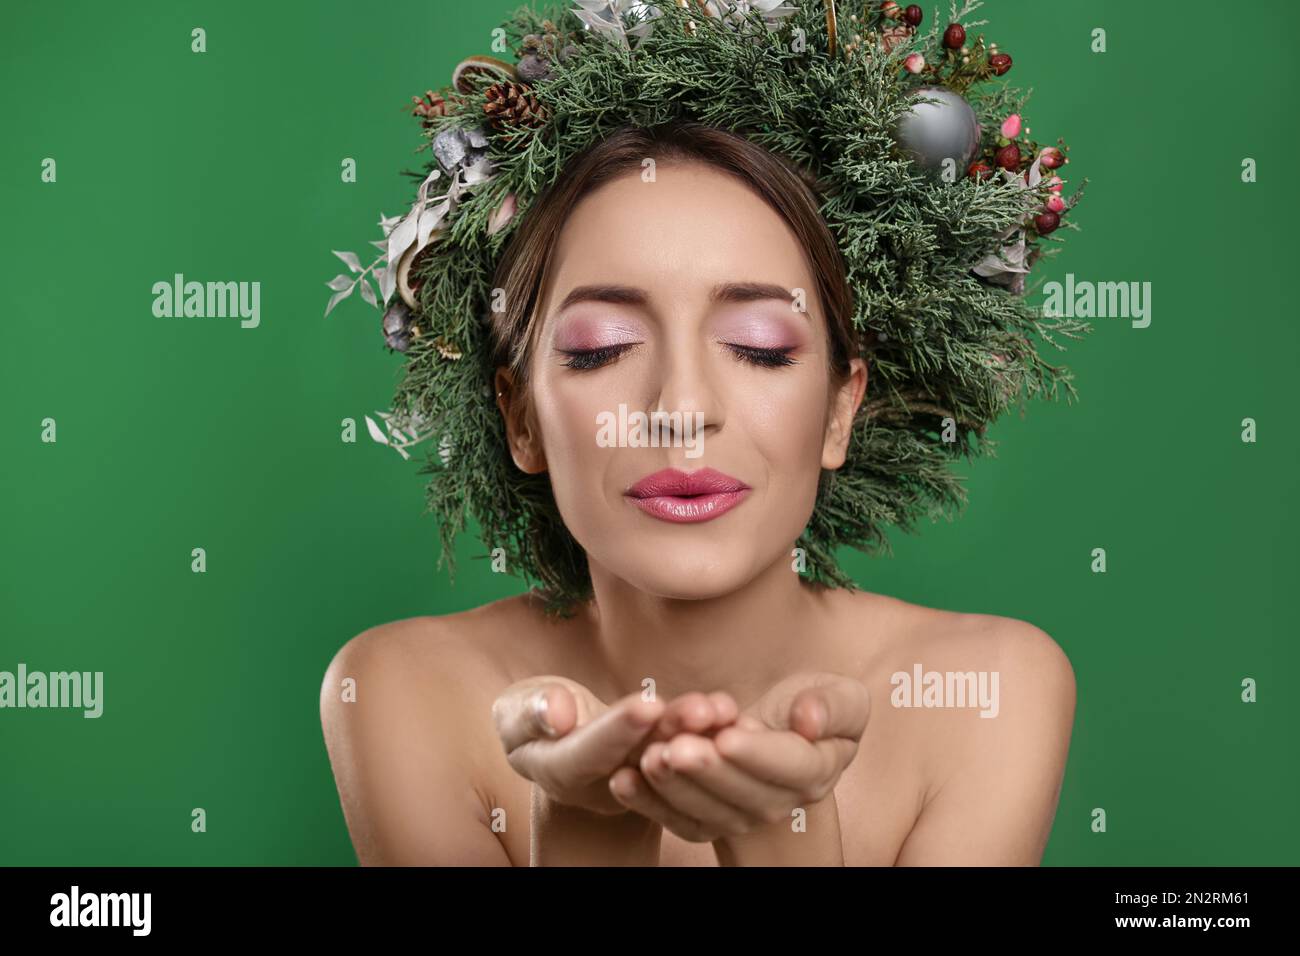 Beautiful young woman with Christmas wreath blowing kiss on green background Stock Photo